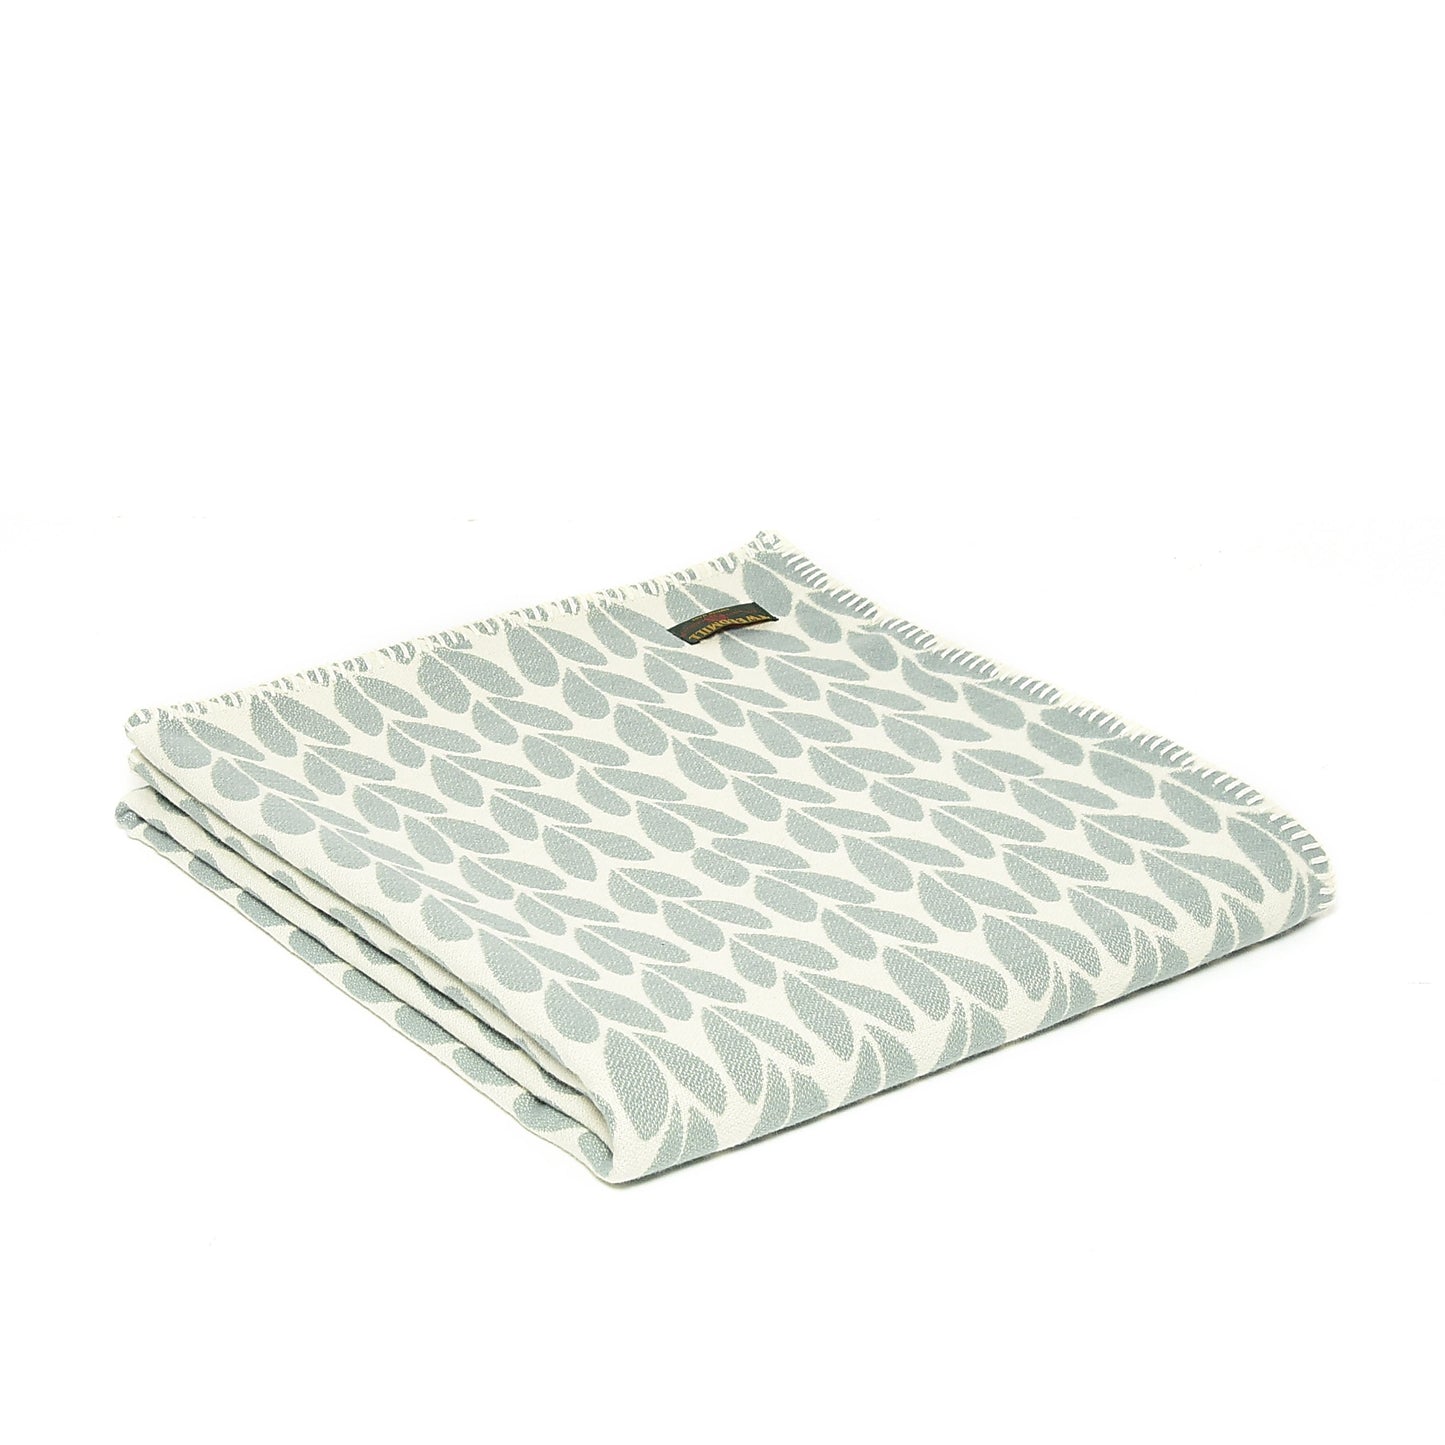 Duck Egg Sycamore Welsh Blanket by Tweedmill